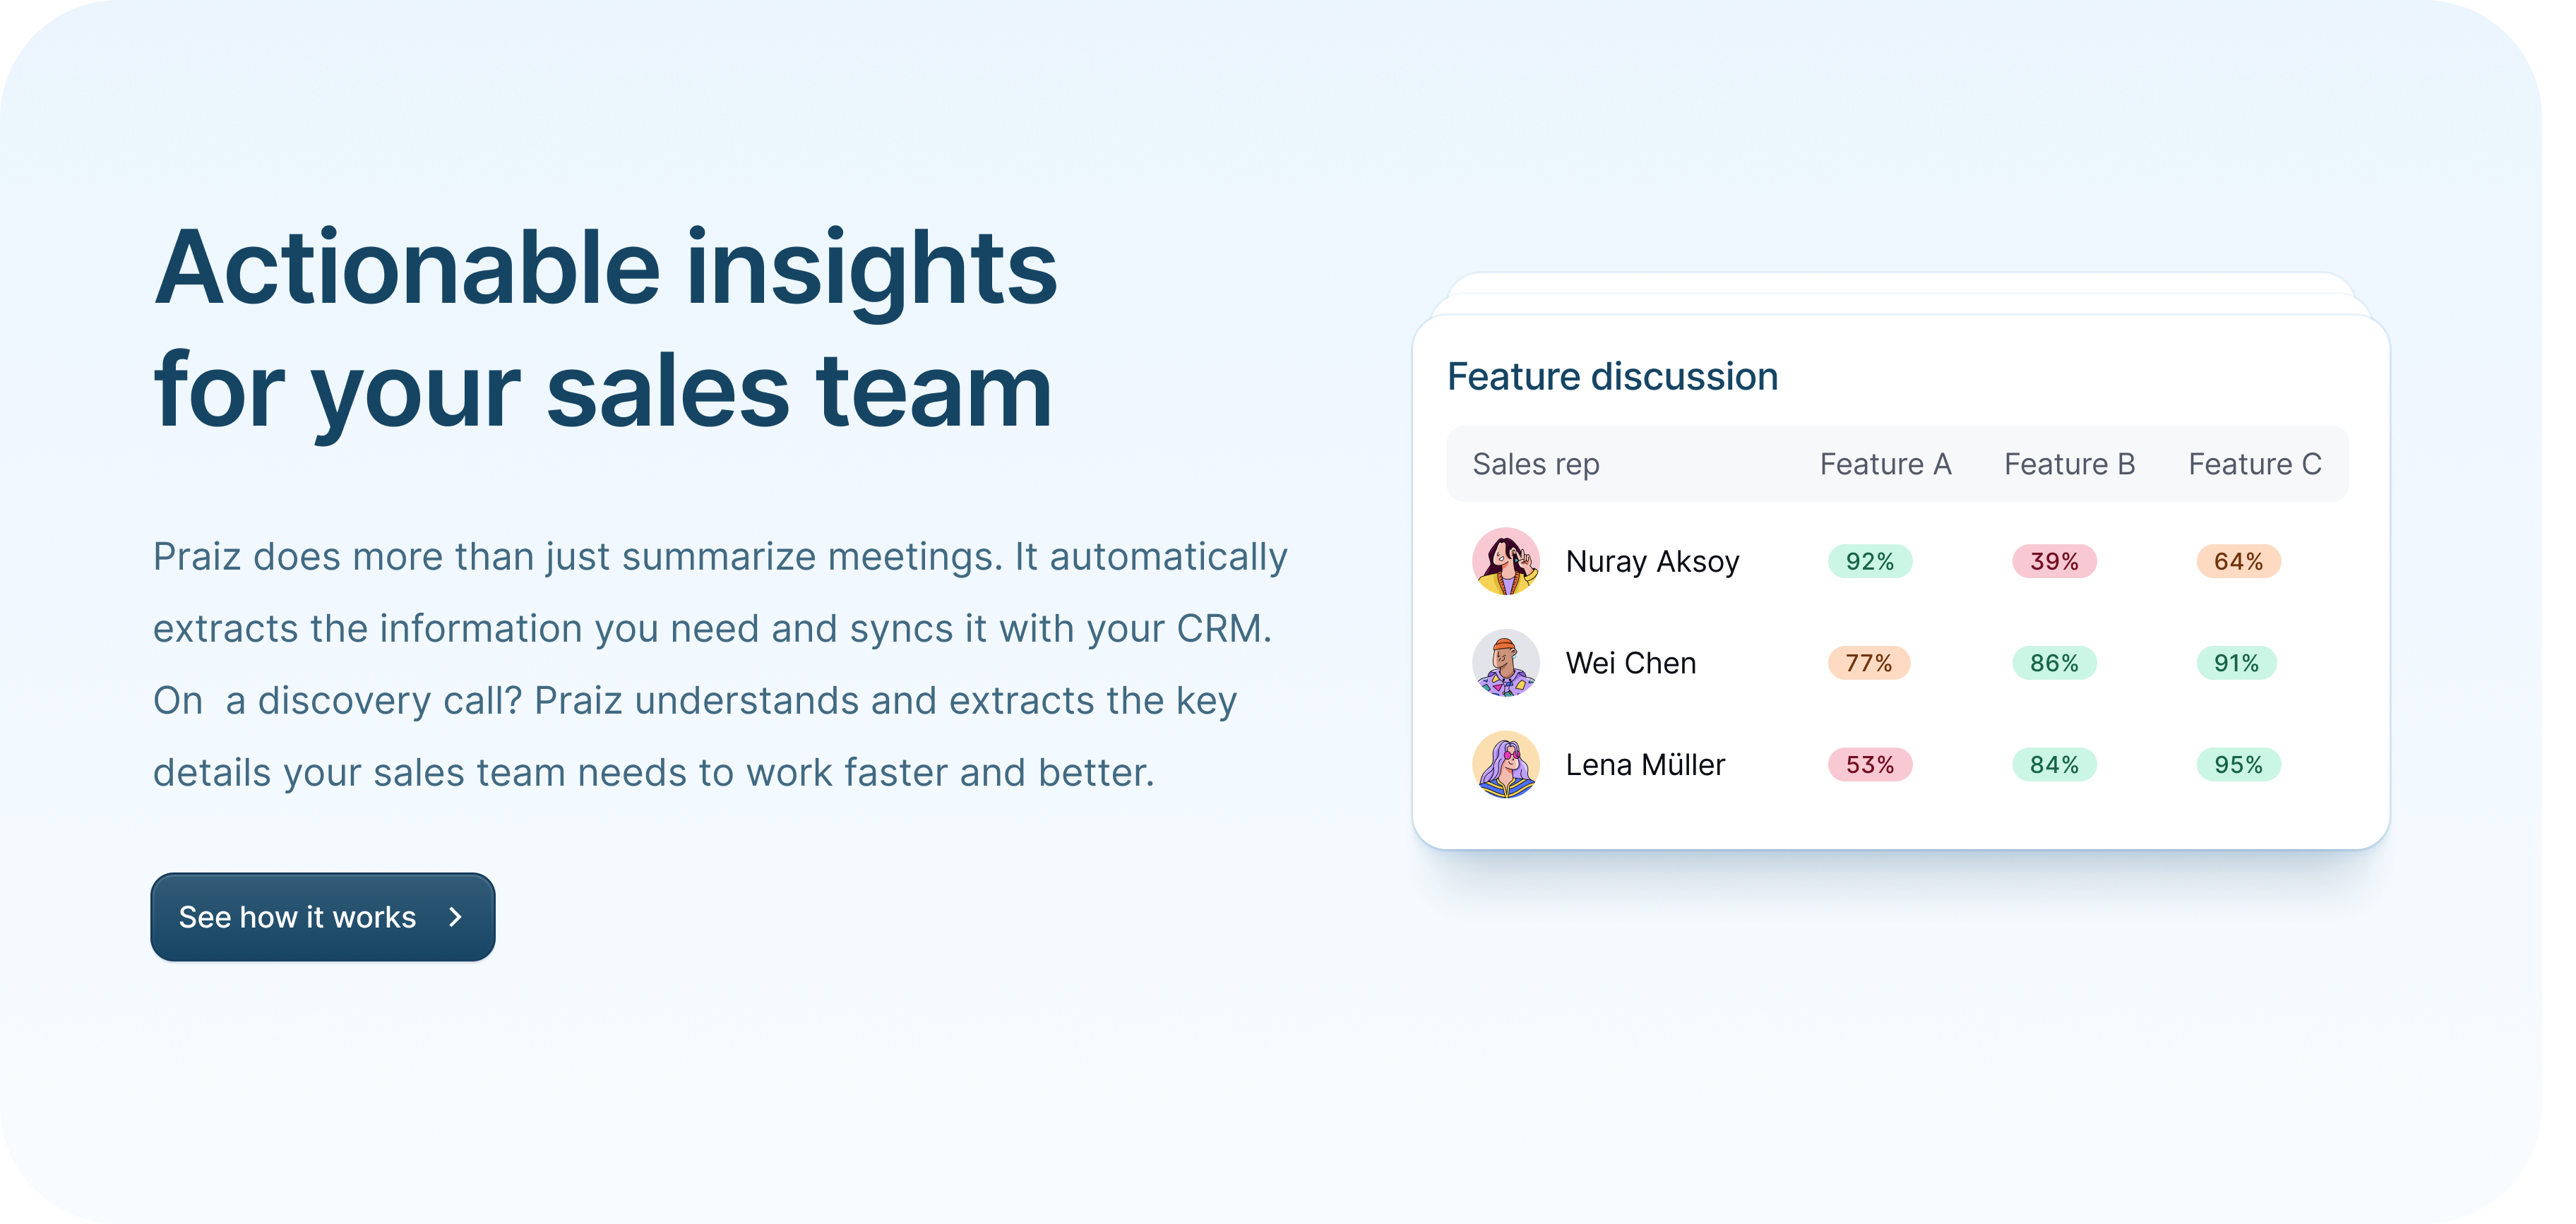 With your CRM filled with accurate data, you’re not blind anymore. Praiz unlocks a new world of actionable insights to better pilot your Sales team. Figure out which pitch works the best, the features you miss, and much more.